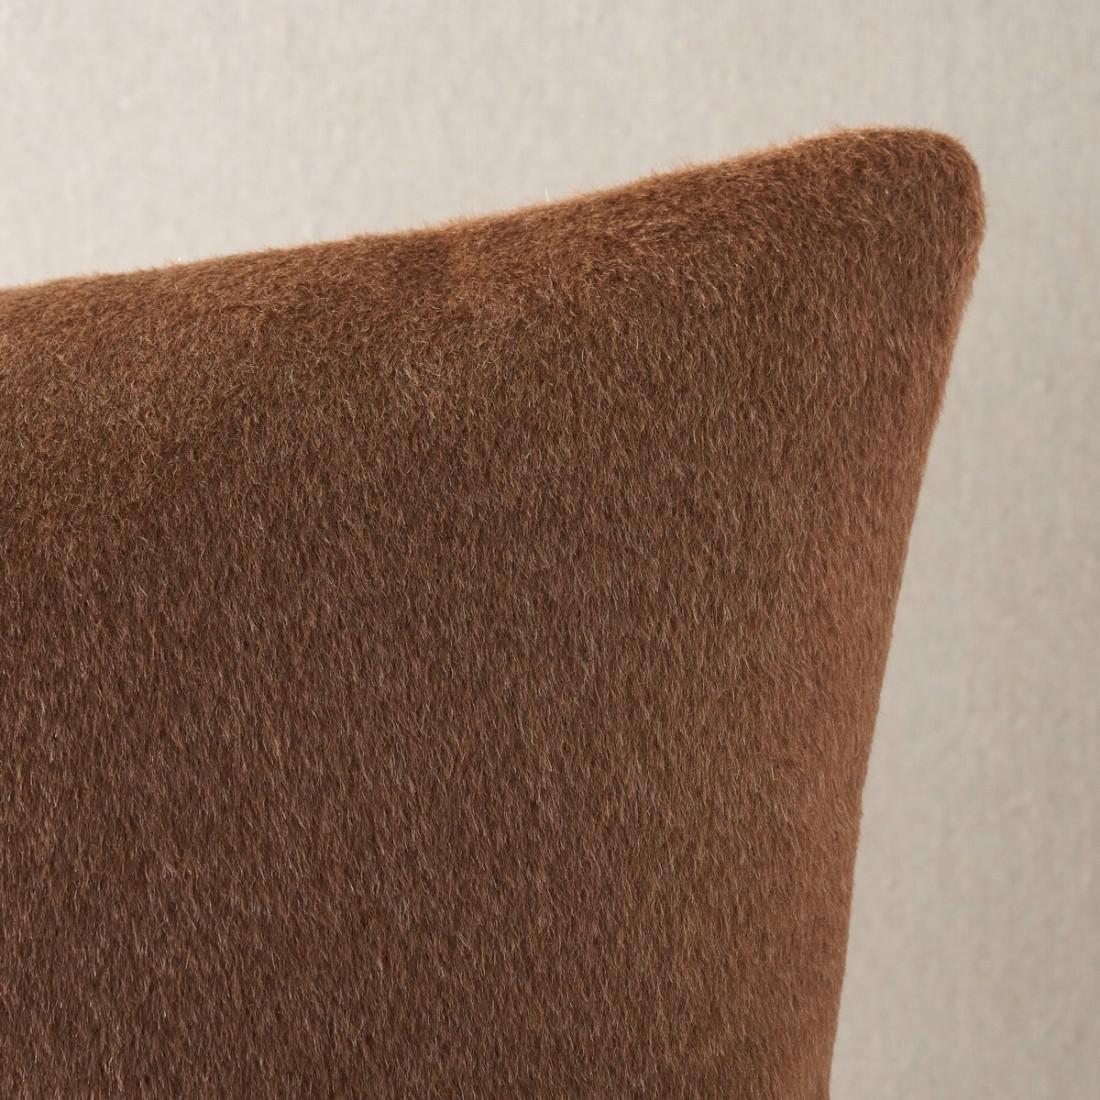 This pillow features Dixon Mohair Weave with a Knife Edge finish. With a brushed and felted finish, this mohair weave has a plush texture and exceptionally soft hand. It's luxurious yet highly resilient and comes in an earthy, neutral palette.